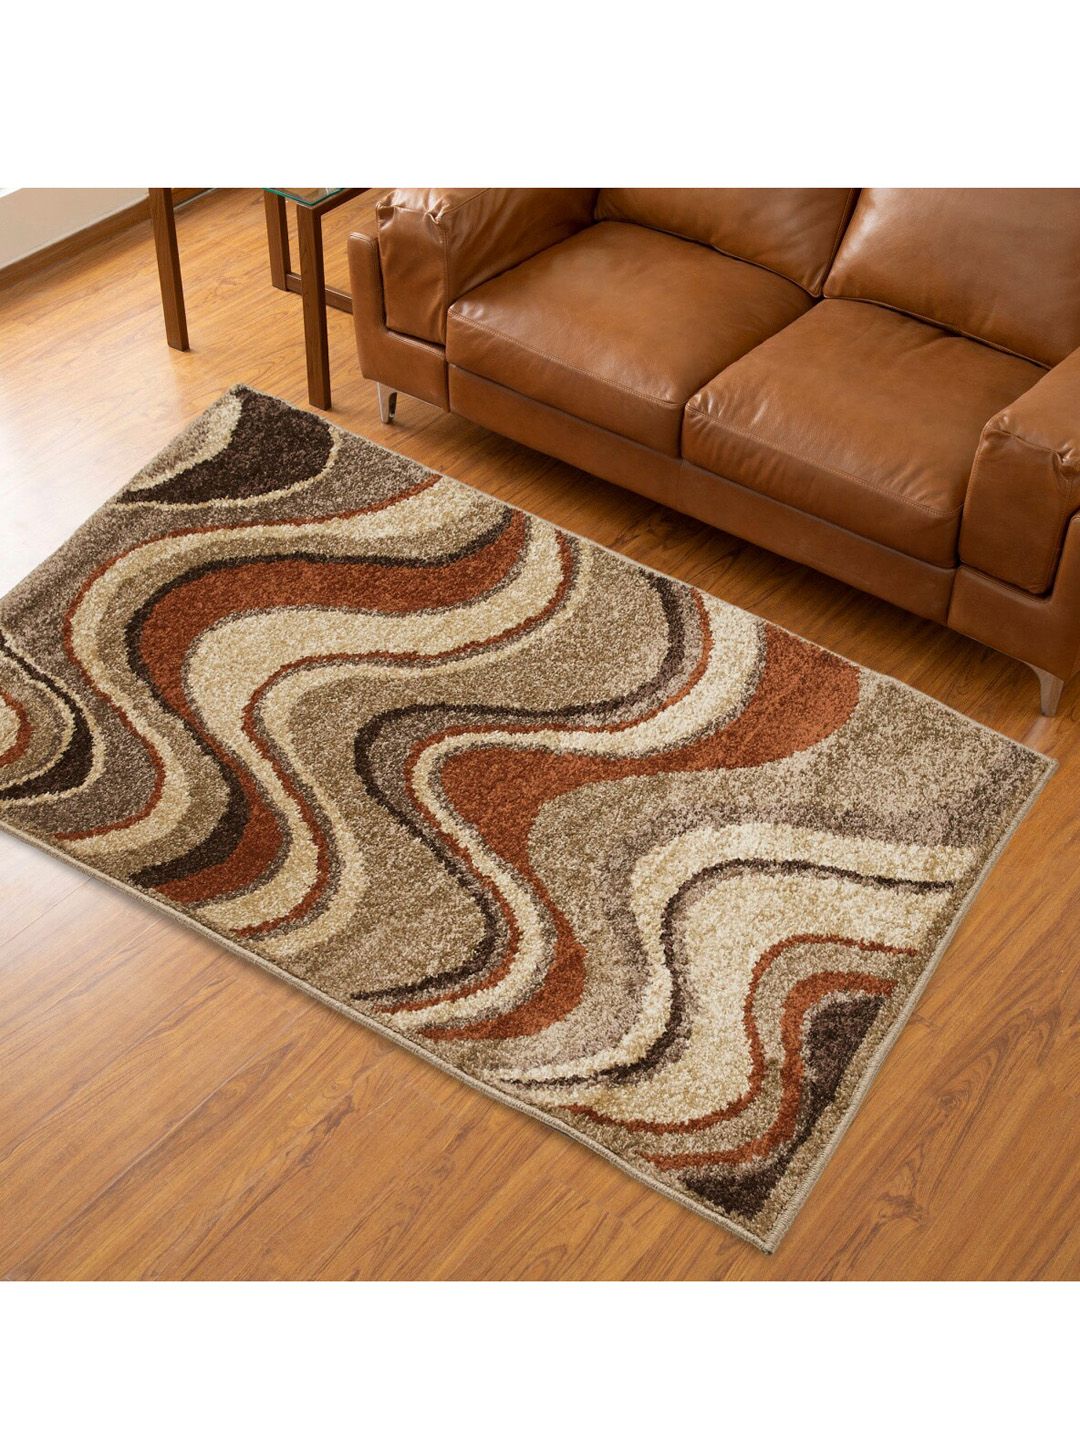 Home Centre Brown & Beige Patterned Rectangular Anti-Skid Carpet Price in India